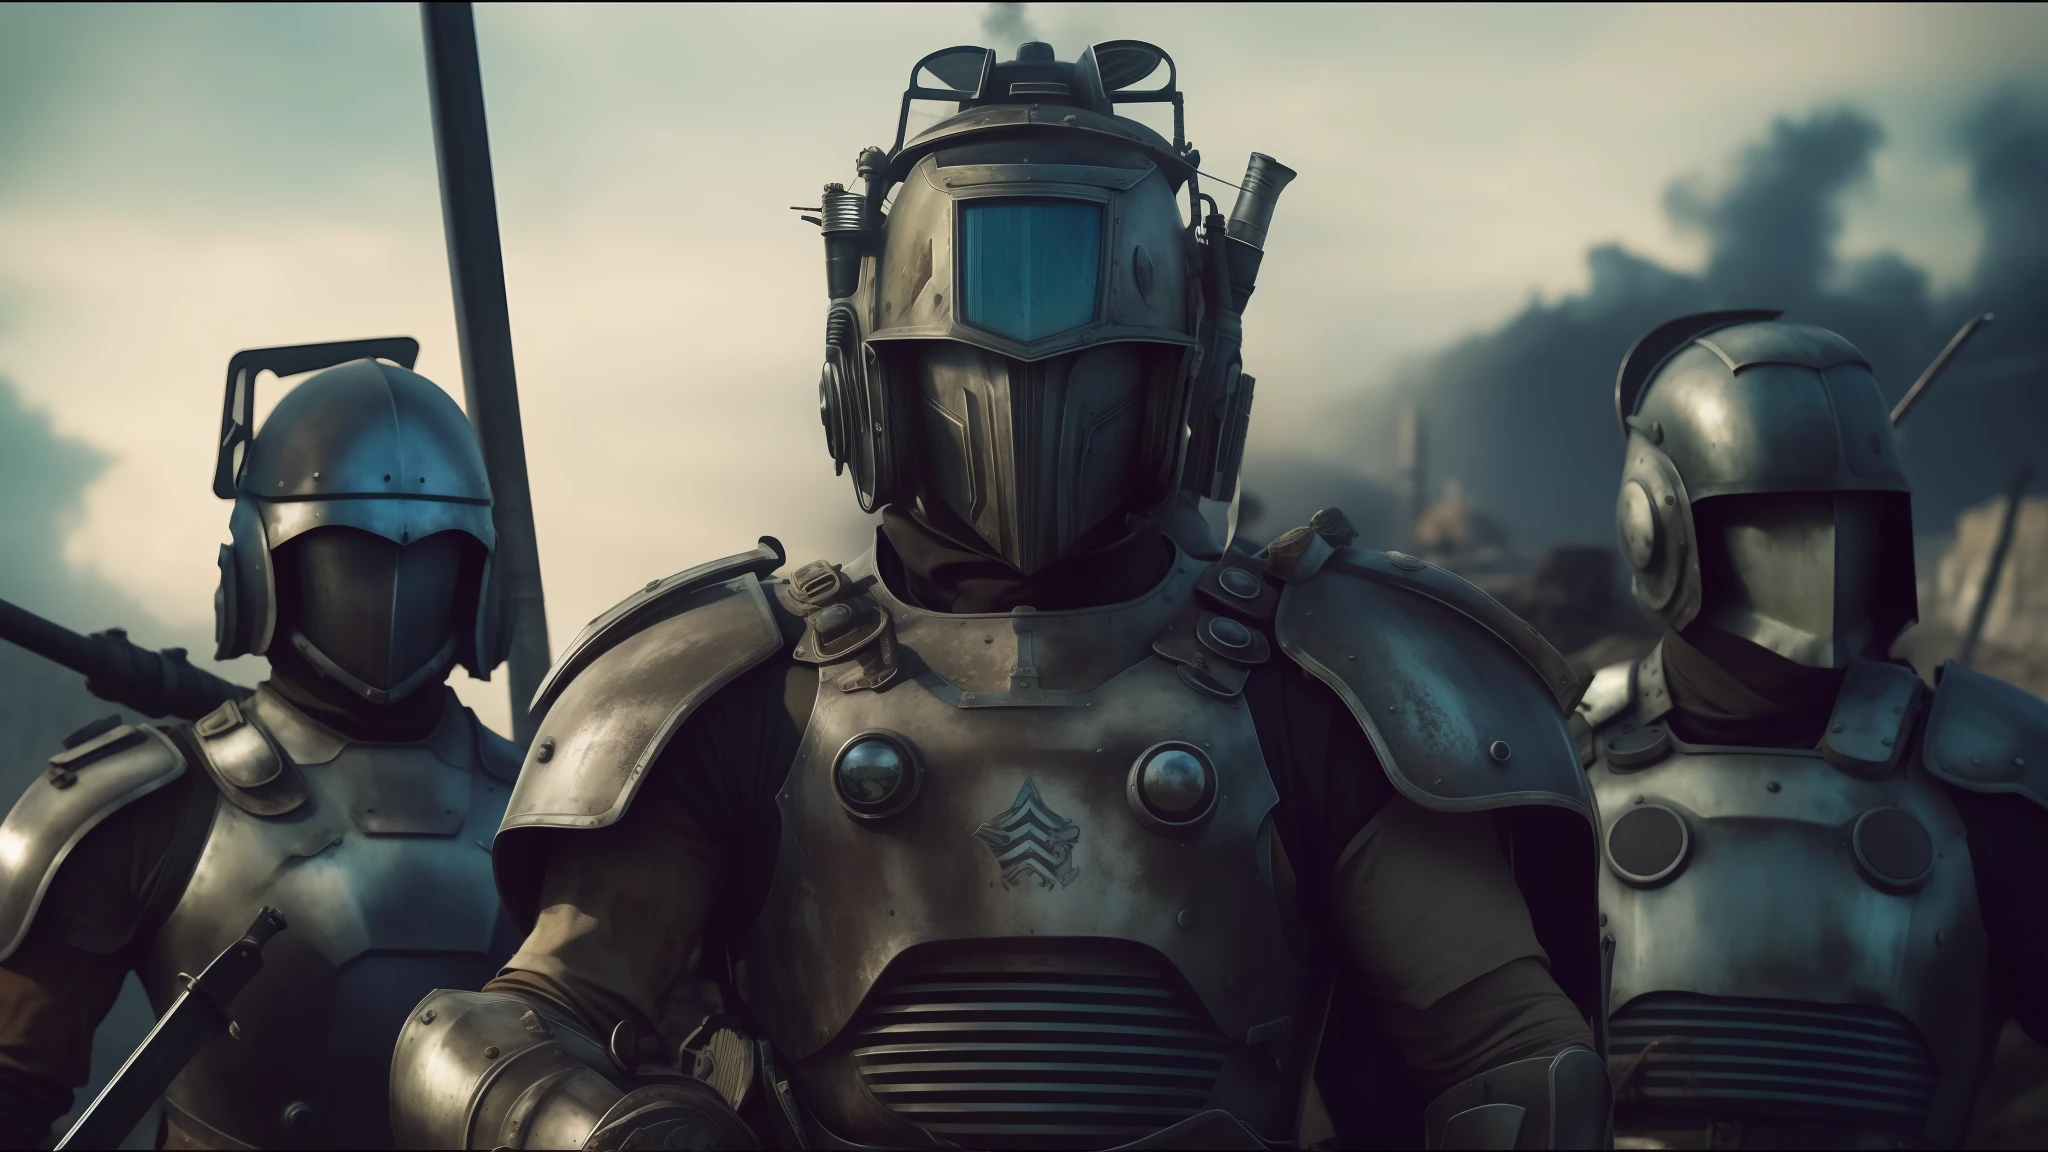 there are three men in armor standing together with swords, futuristic dieselpunk street, youtube thumbnail, wastelands, shot on anamorphic lenses, realistic restored face, red heavy armor, by David B. Mattingly, machinarium, streaming on twitch, kit bash, guards, rural wastelands